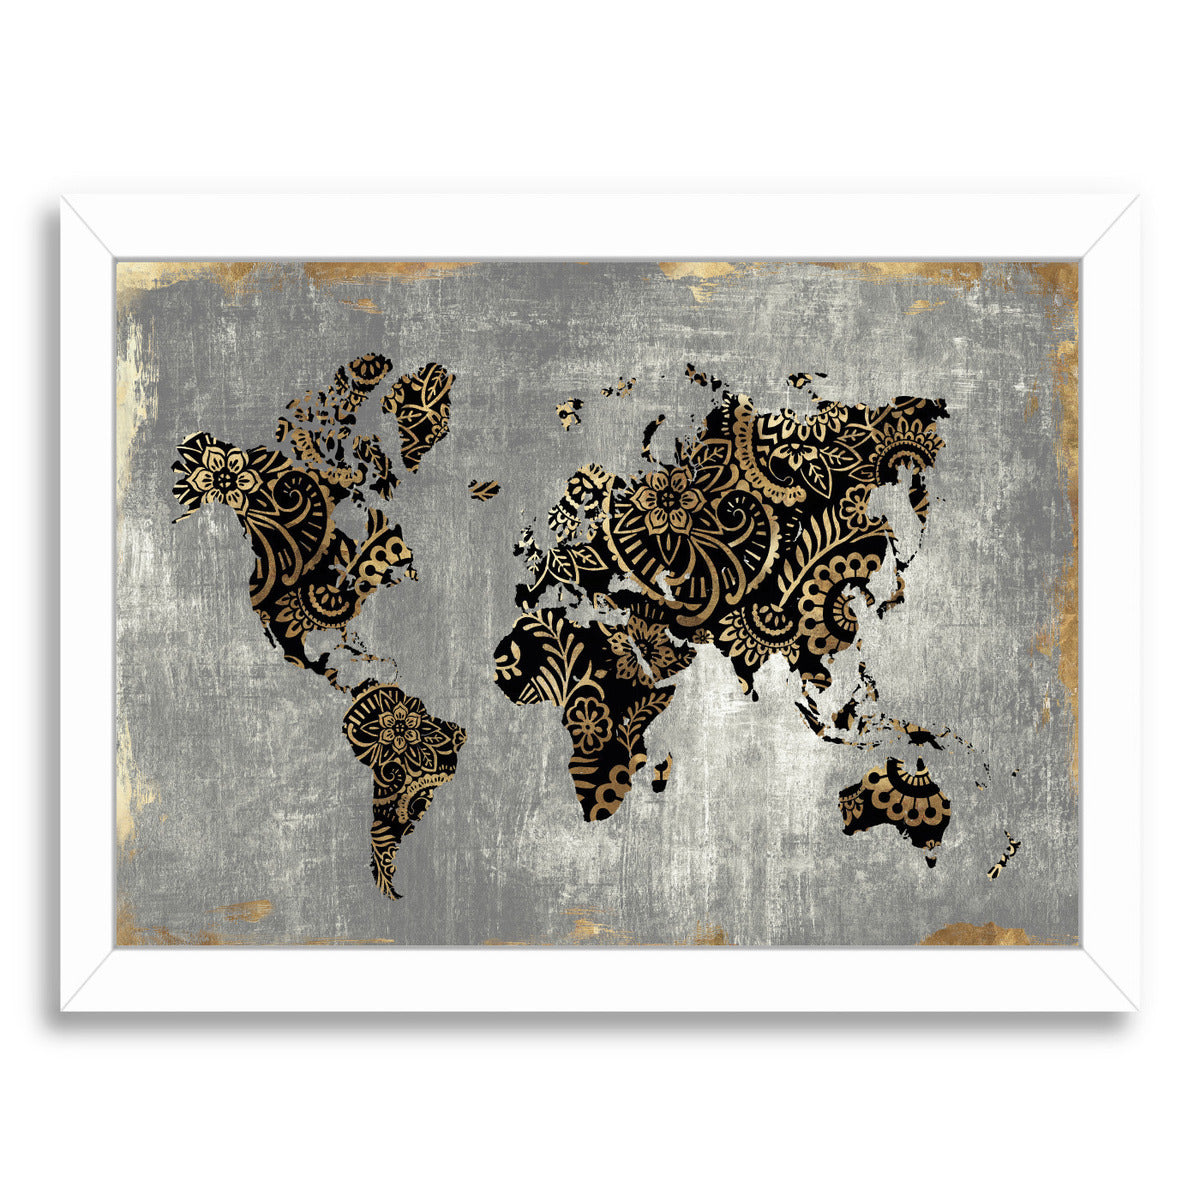 Gold World Map by PI Creative Art Framed Print - Americanflat